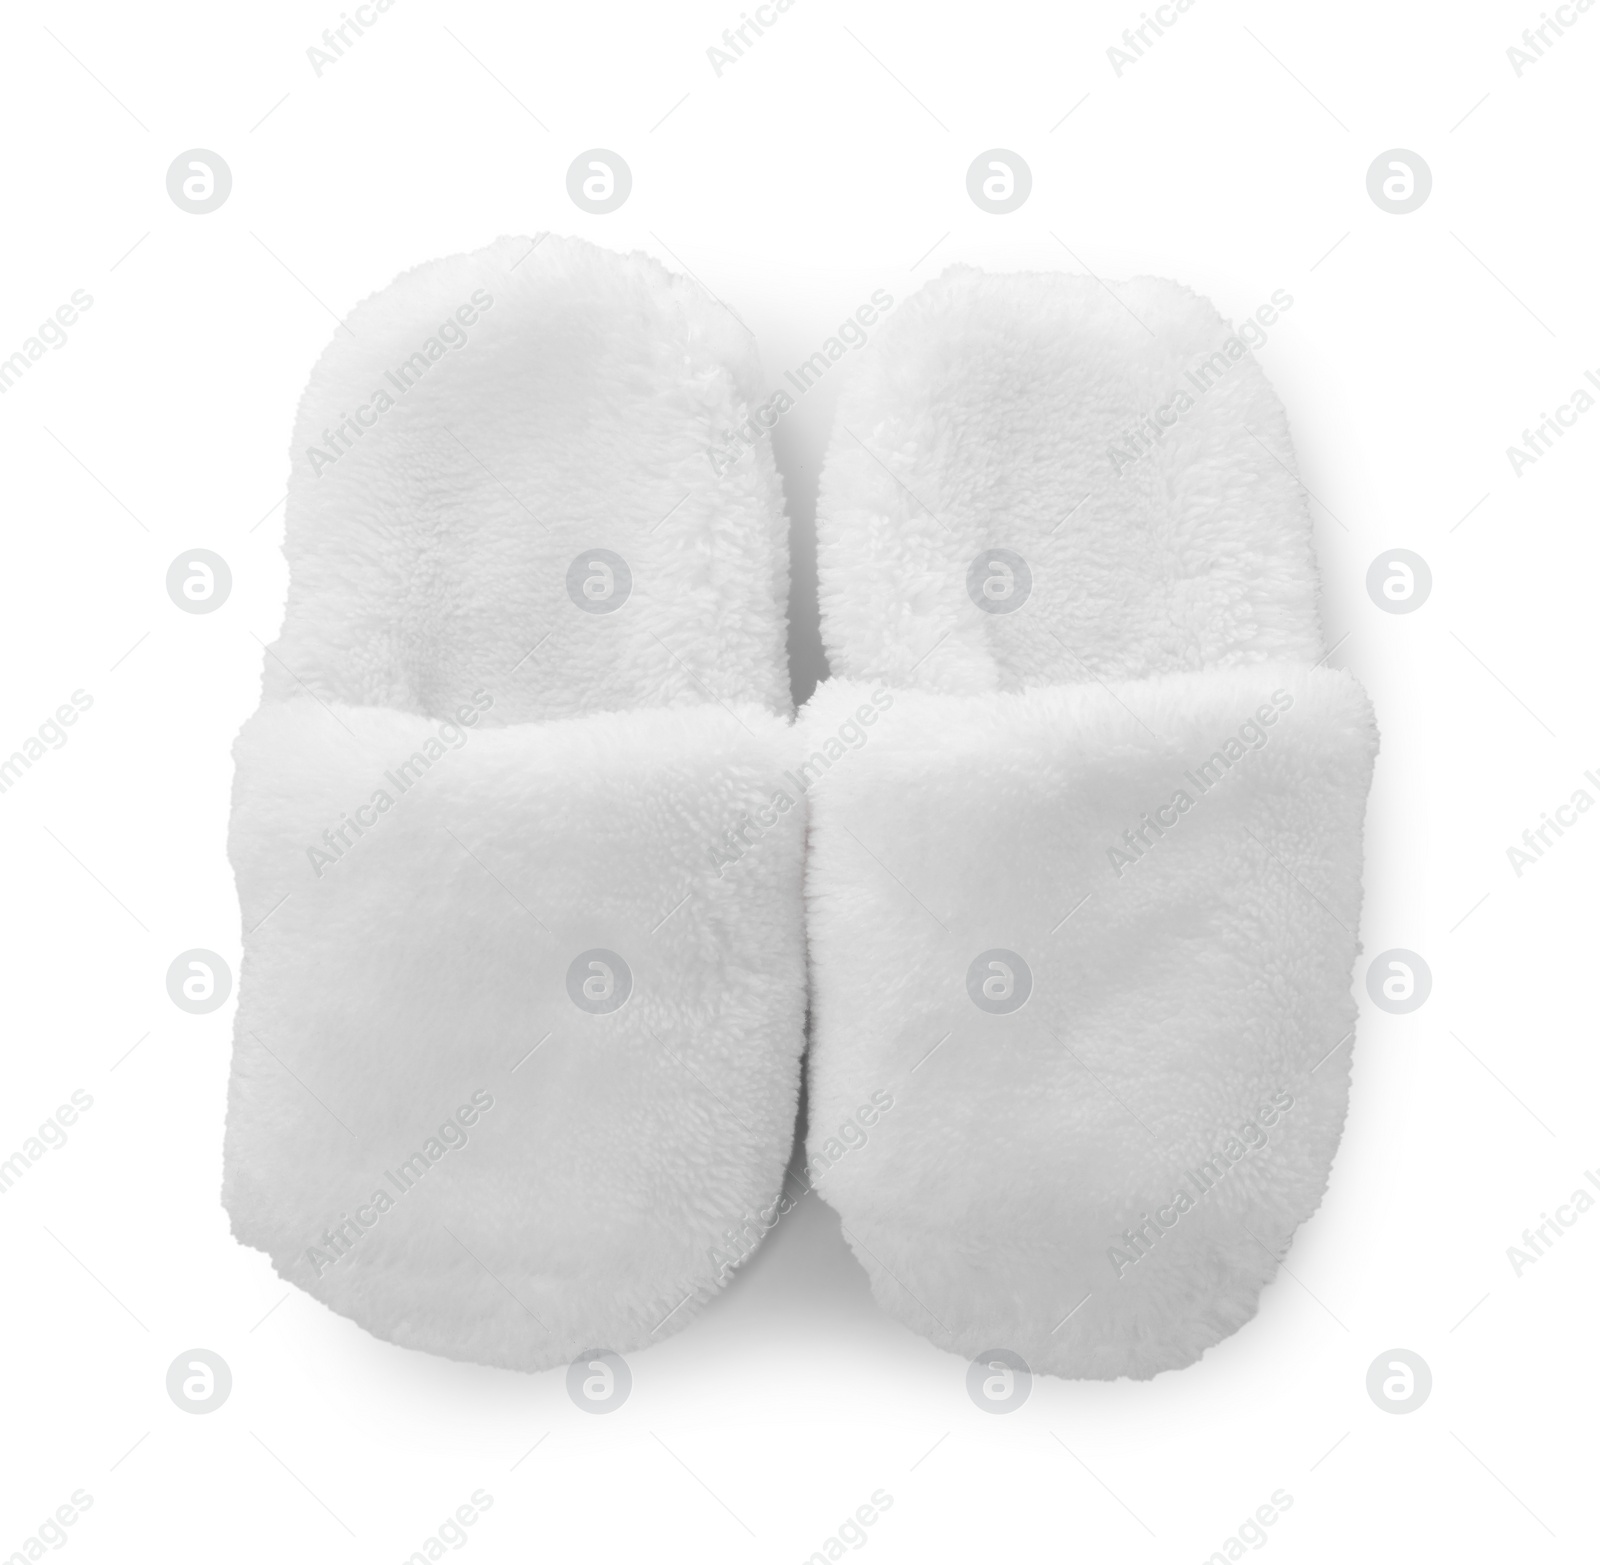 Photo of Pair of soft slippers isolated on white, top view